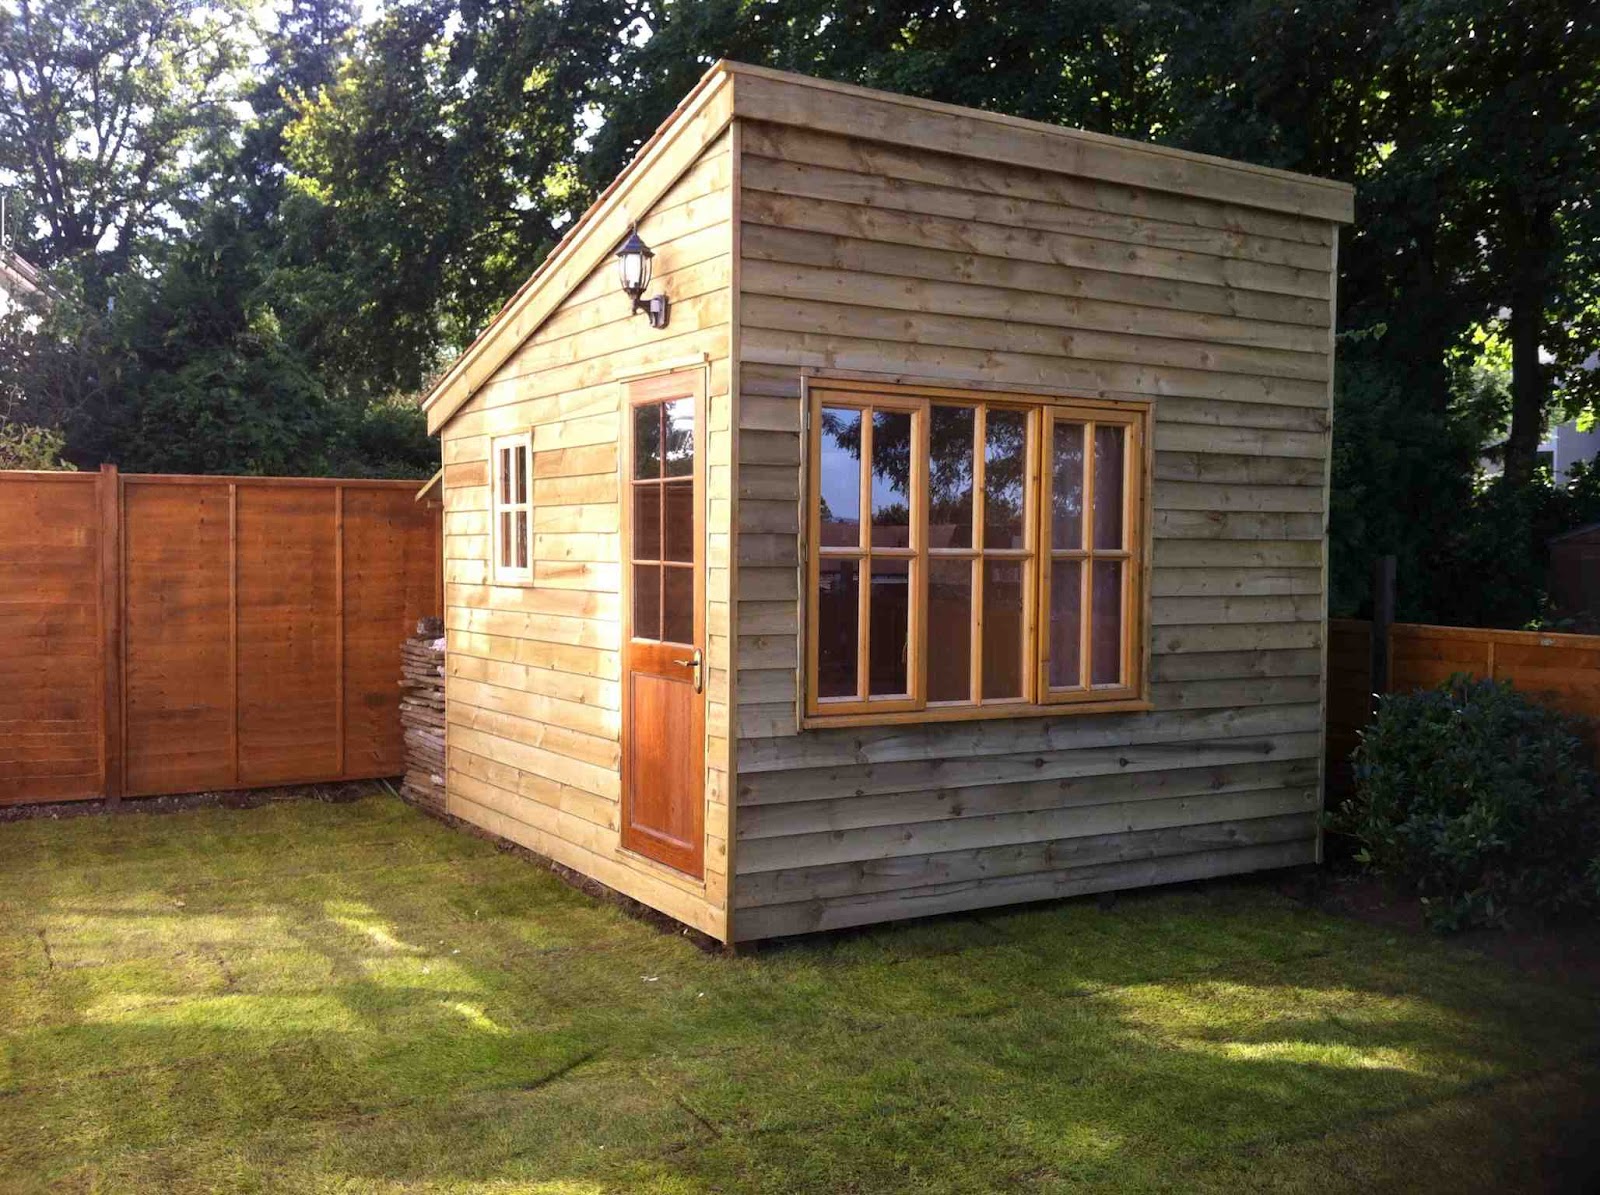 ... of Improvement Leads Home: Building an Office Shed: Before and After